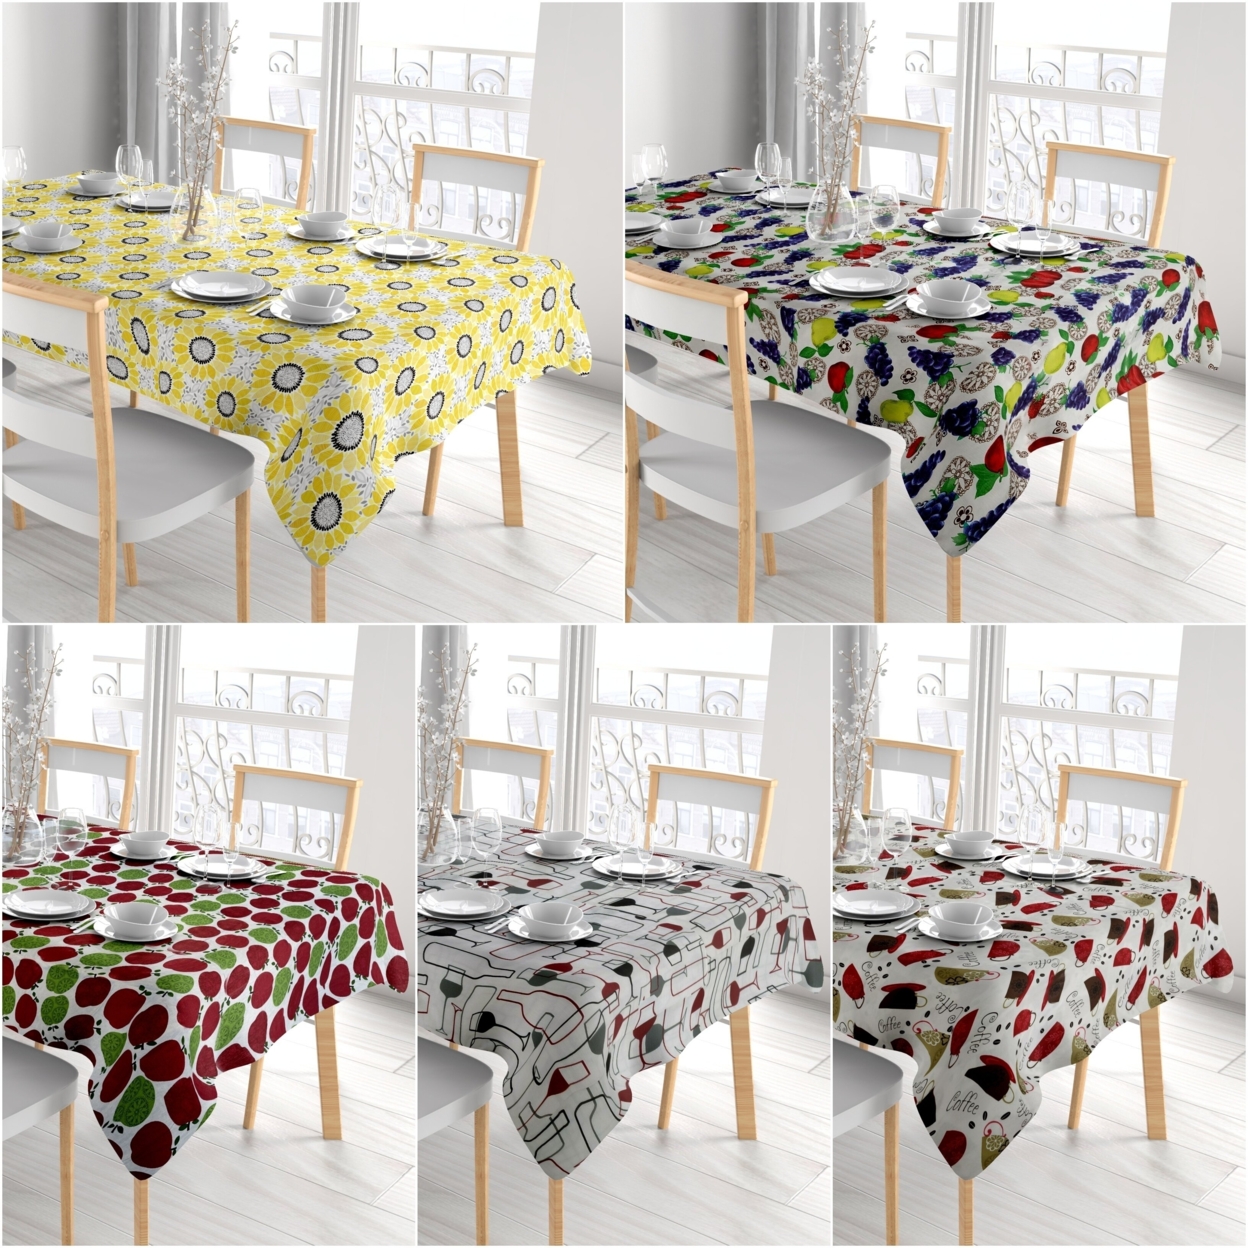 2-Pack Waterproof Printed Flannel Back Vinyl Tablecloth - Assorted, 52 X 70